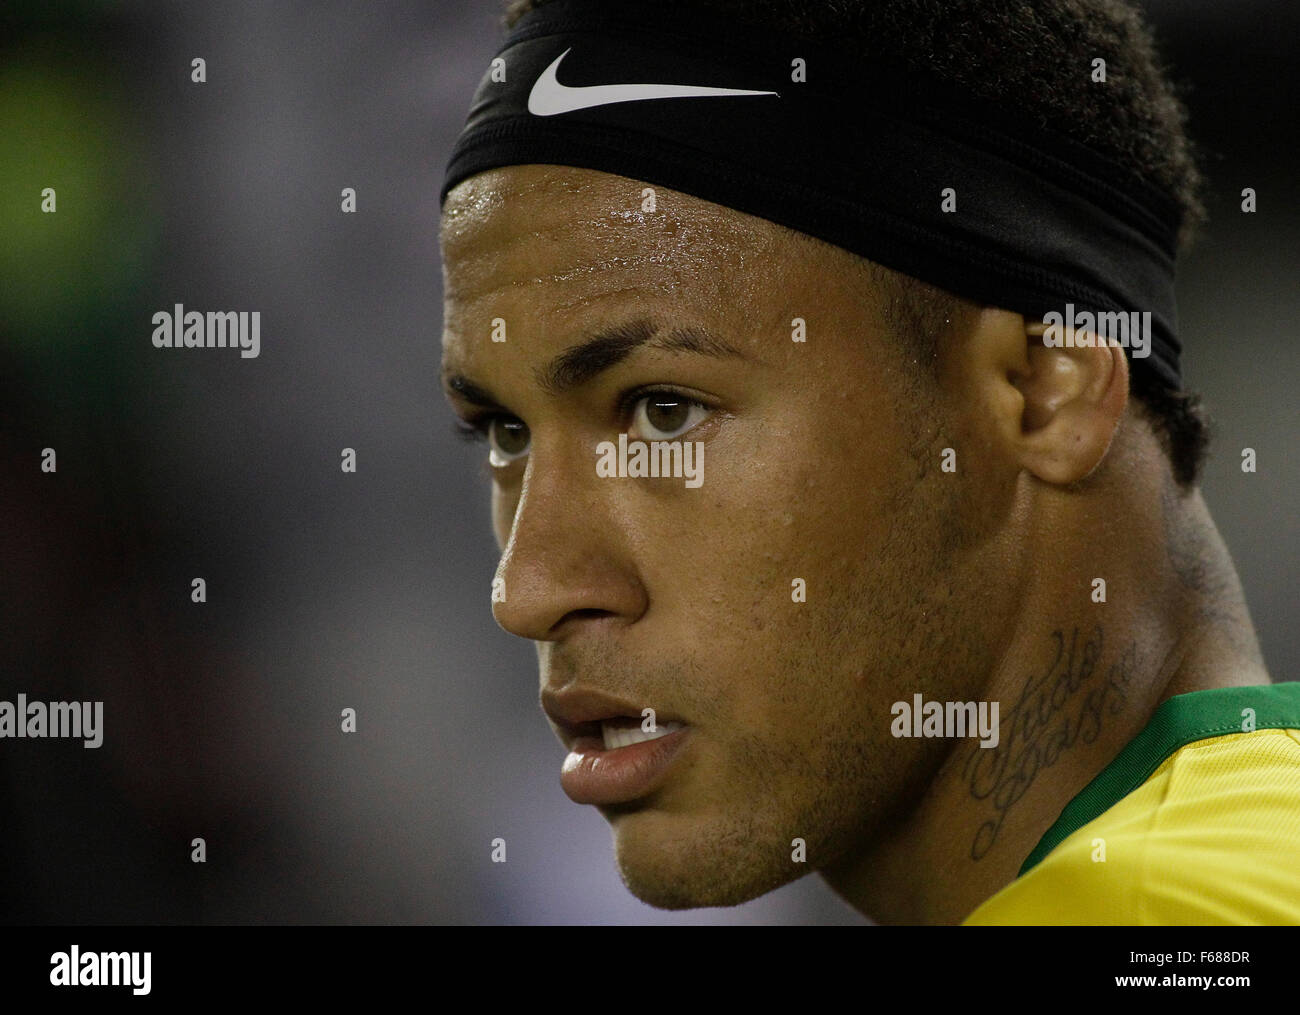 Buenos Aires, Argentina. 13th Nov, 2015. Brazil's Neymar reacts during the 2018 Russia World Cup qualifying match between Argentina and Brazil in the Monumental Antonio Vespuci Stadium in Buenos Aires, capital of Argentina, on Nov. 13, 2015. The match ended in a draw 1-1. Credit:  Alberto Raggio/Xinhua/Alamy Live News Stock Photo